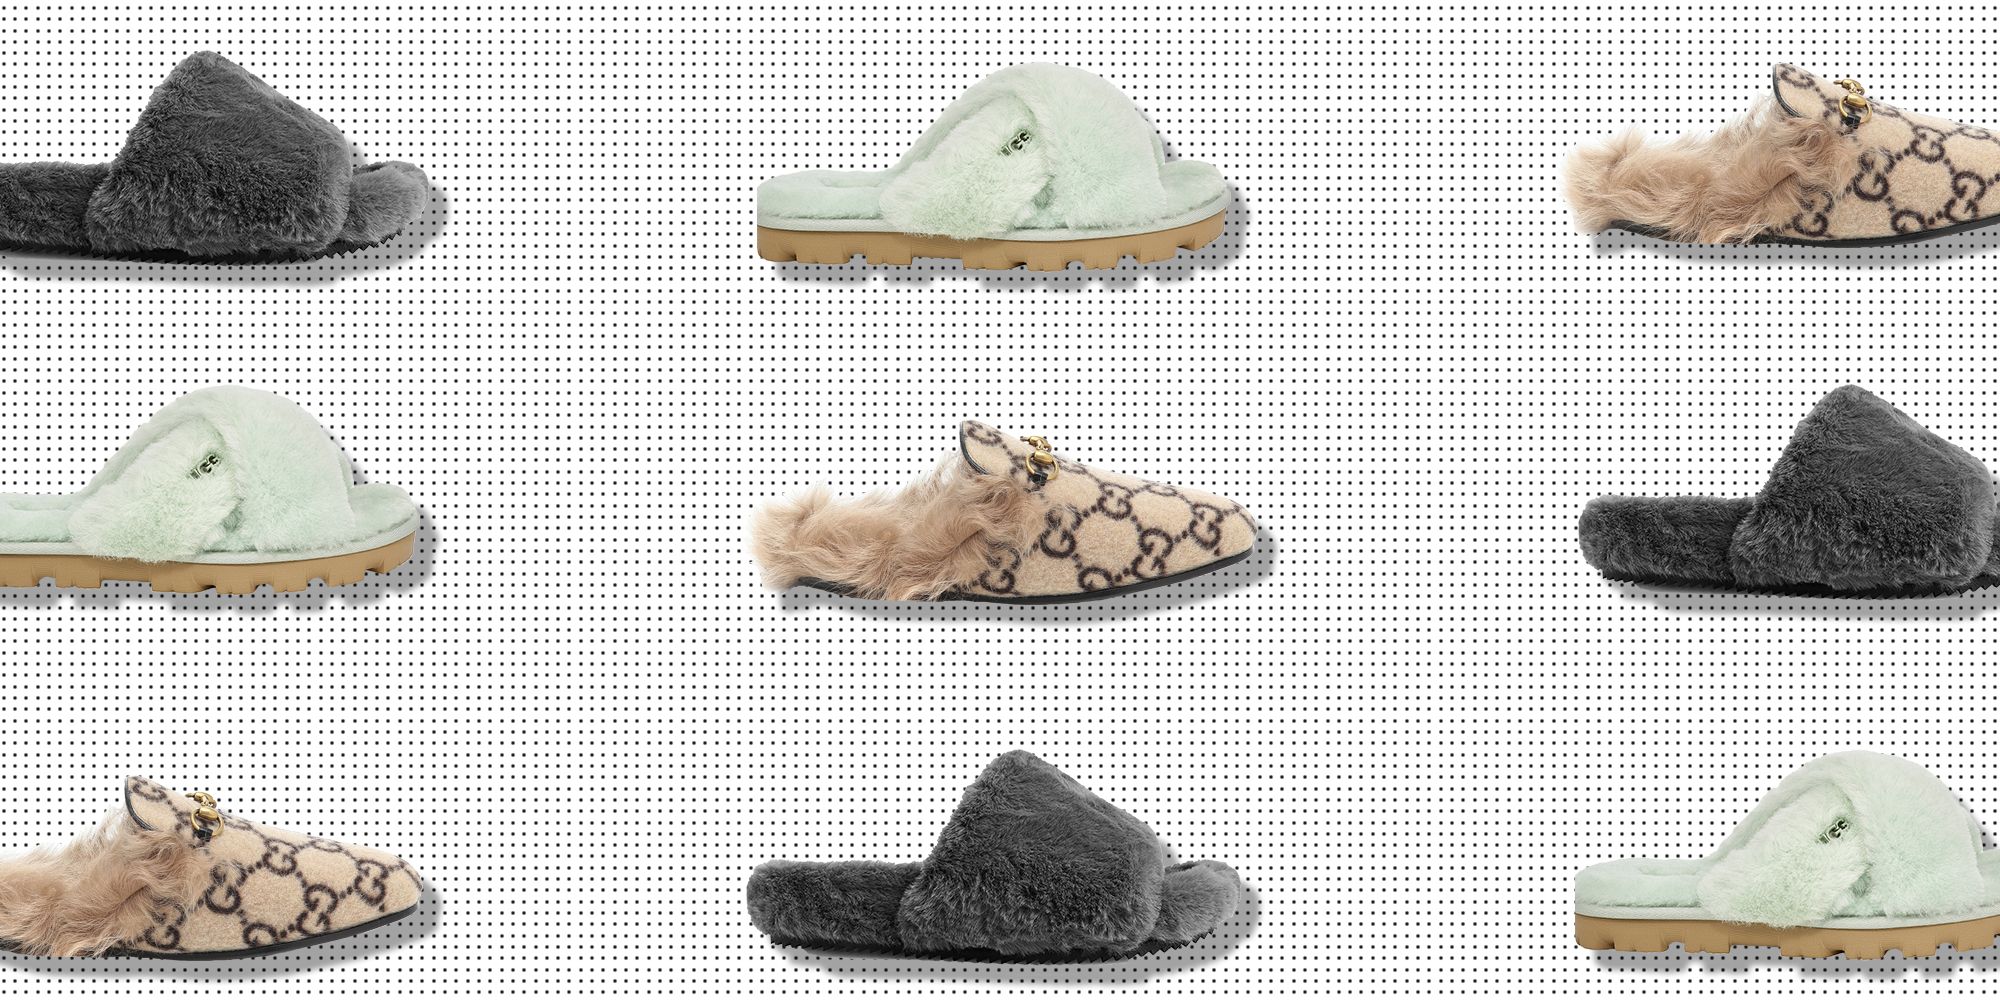 Women's Slippers You Won't Want To Save Just For Bedtime | Flipboard